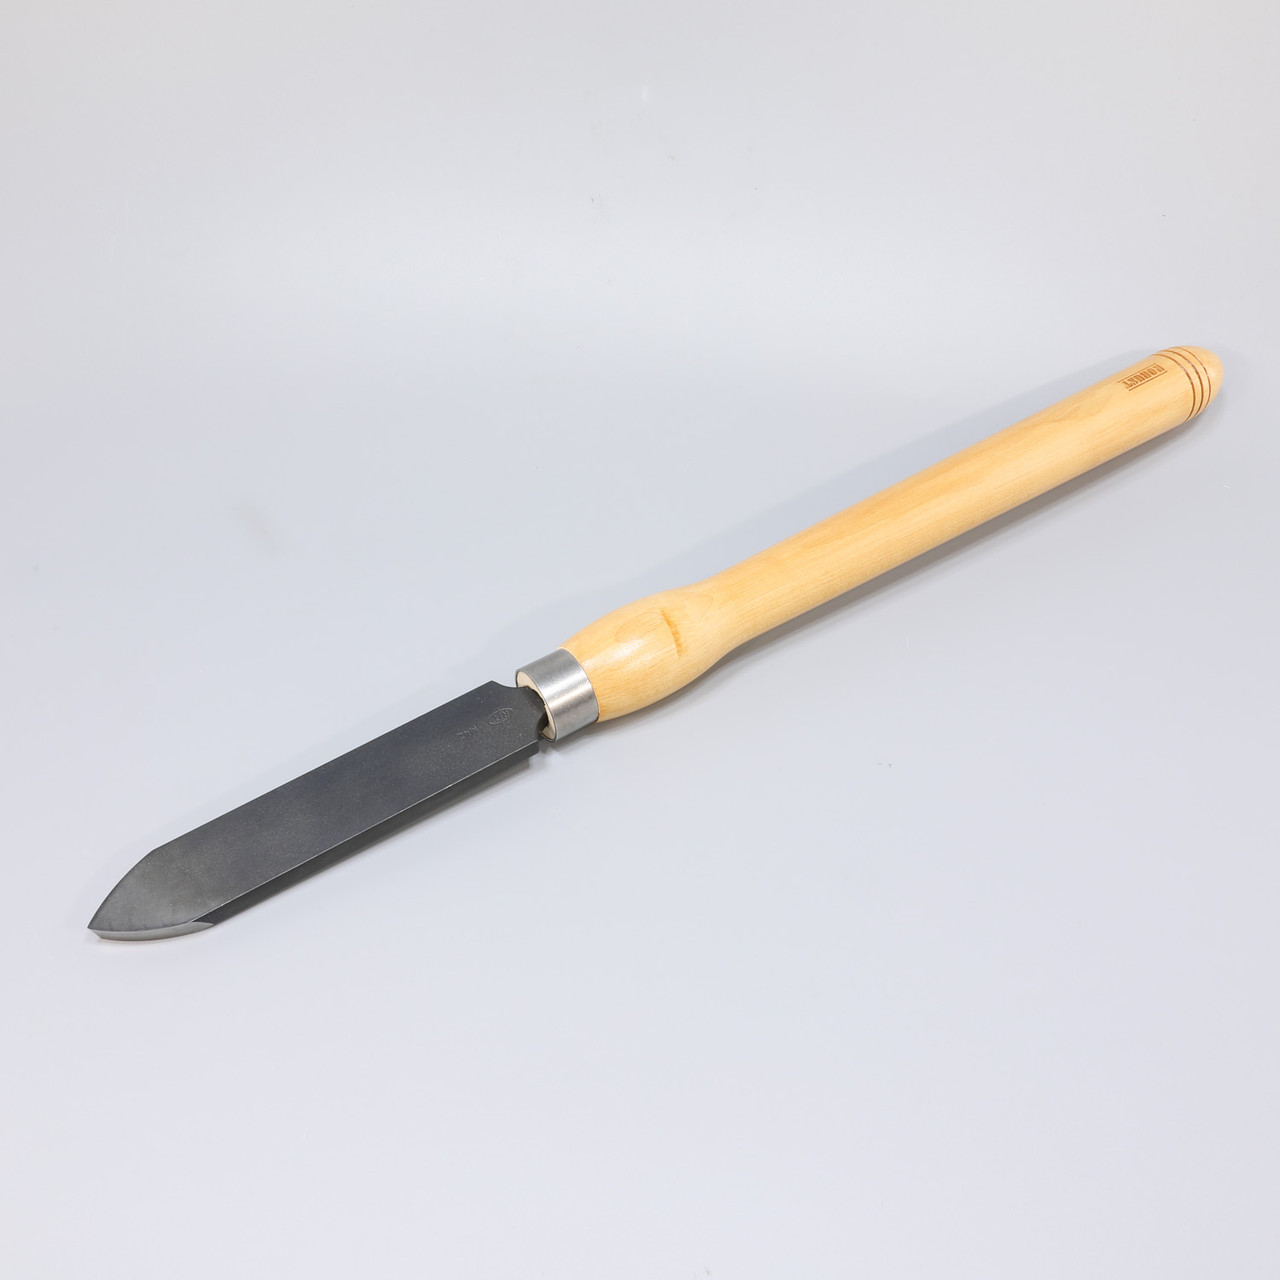 Robust, SS-XL-WH, 1 3/8" x 3/8" XL Spear Scraper with Maple Handle